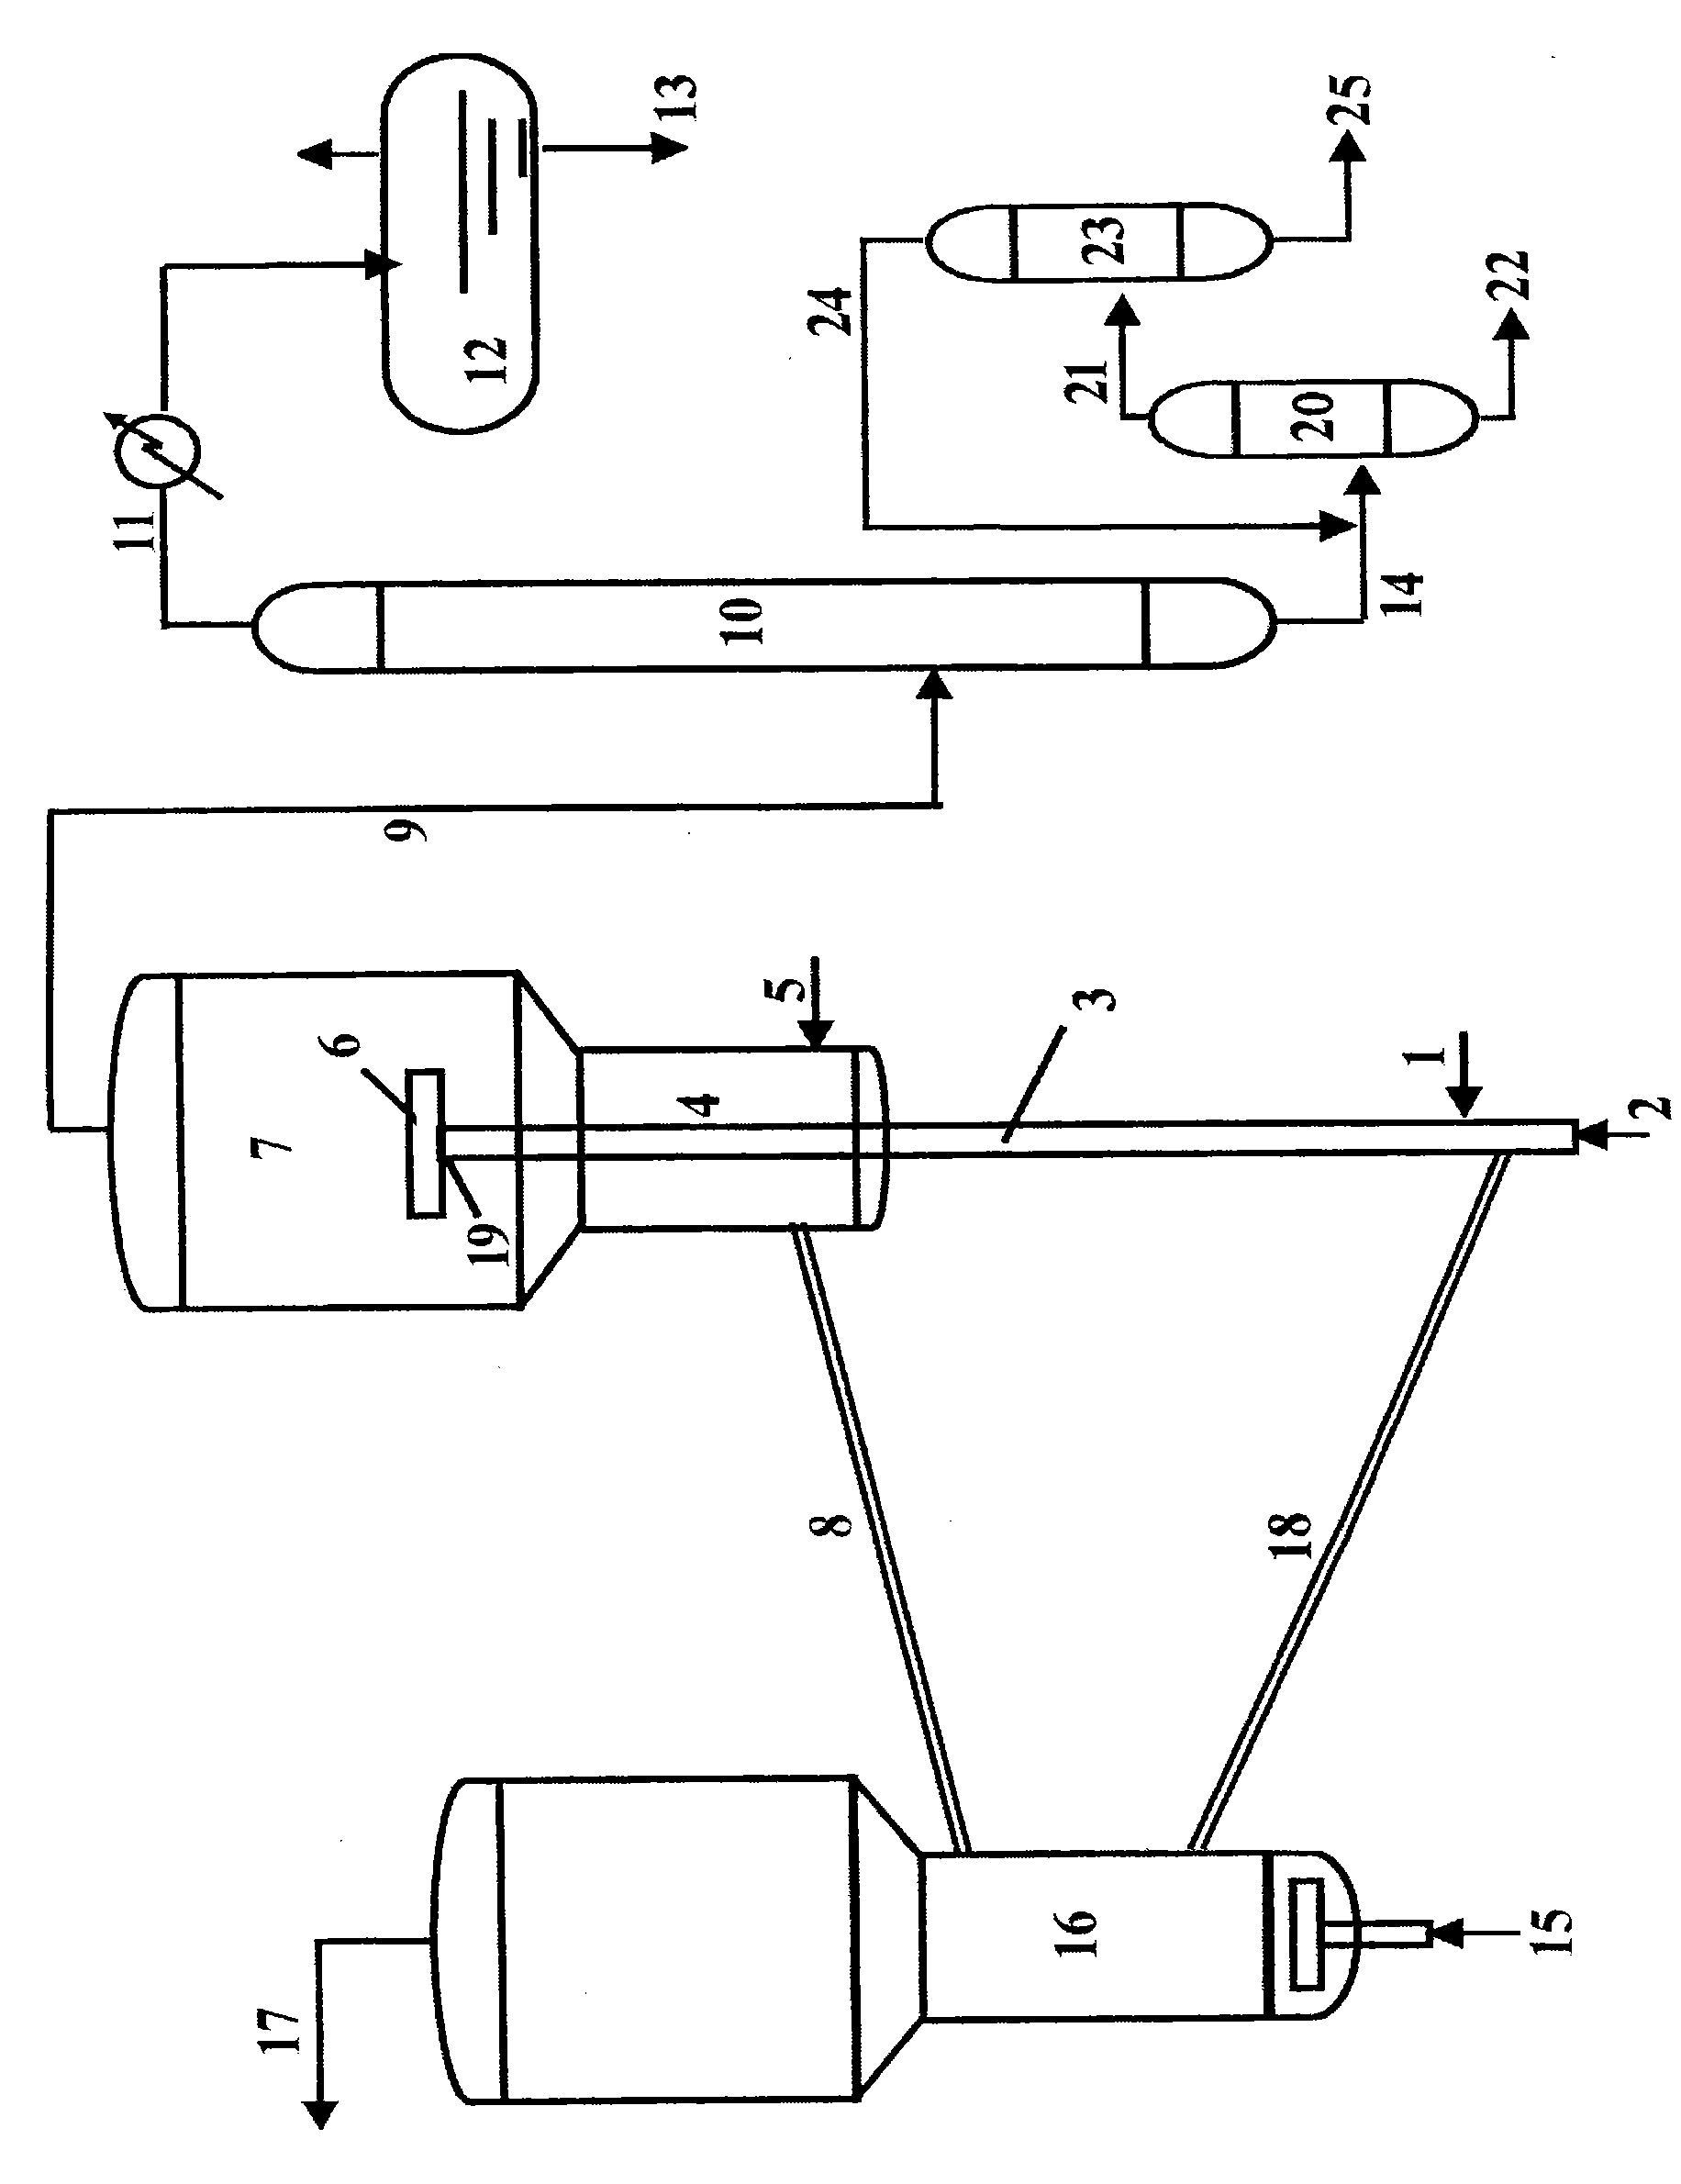 Process method for modifying and processing extra-heavy crude oil